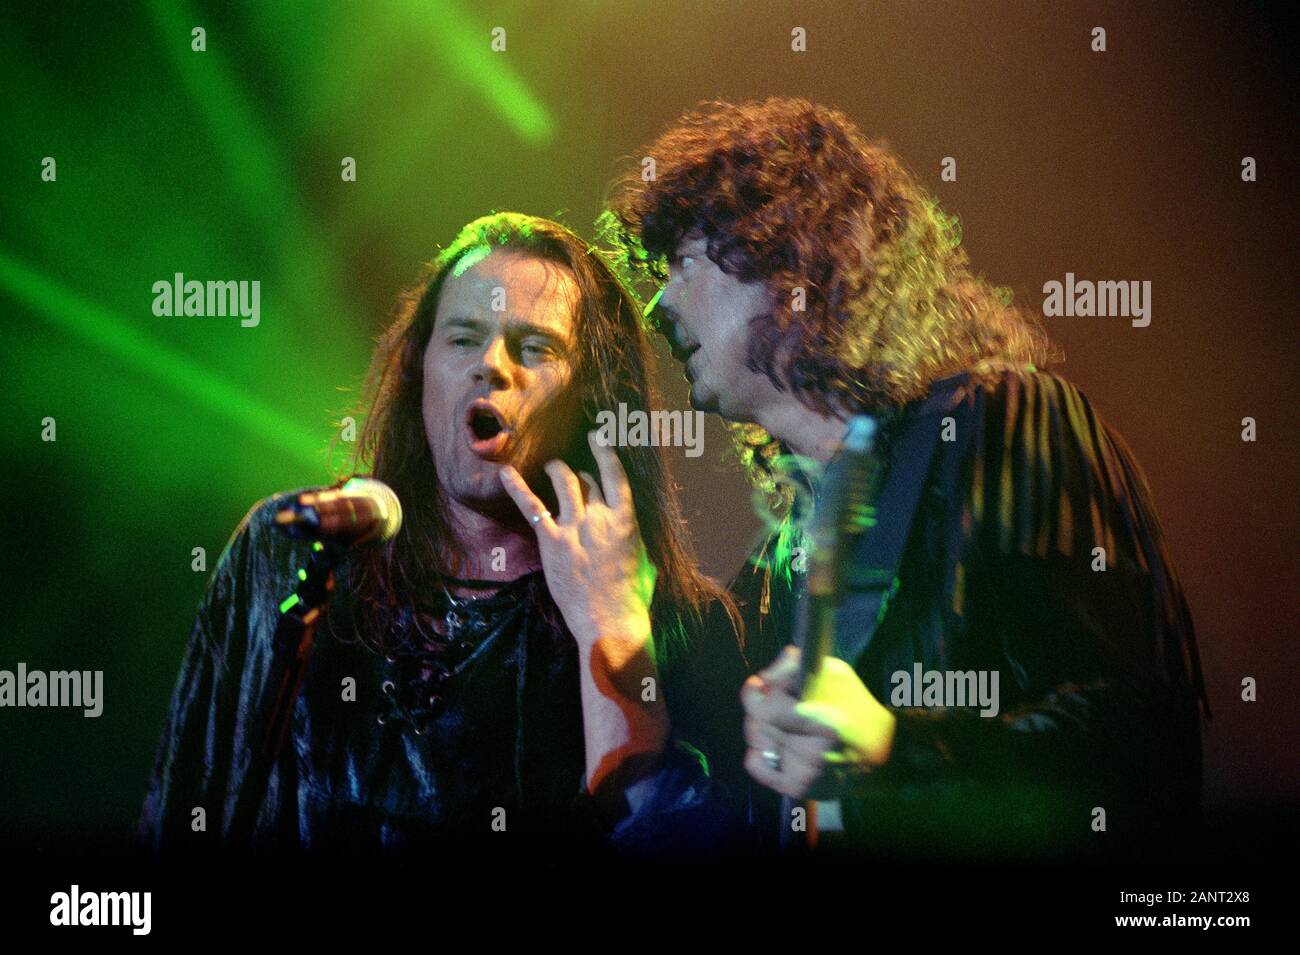 Milano italy 28/10/1995 Live concert of Ritchie Blackmore's Rainbow at the Palalido :Doogie White and Ritchie Blackmore Stock Photo